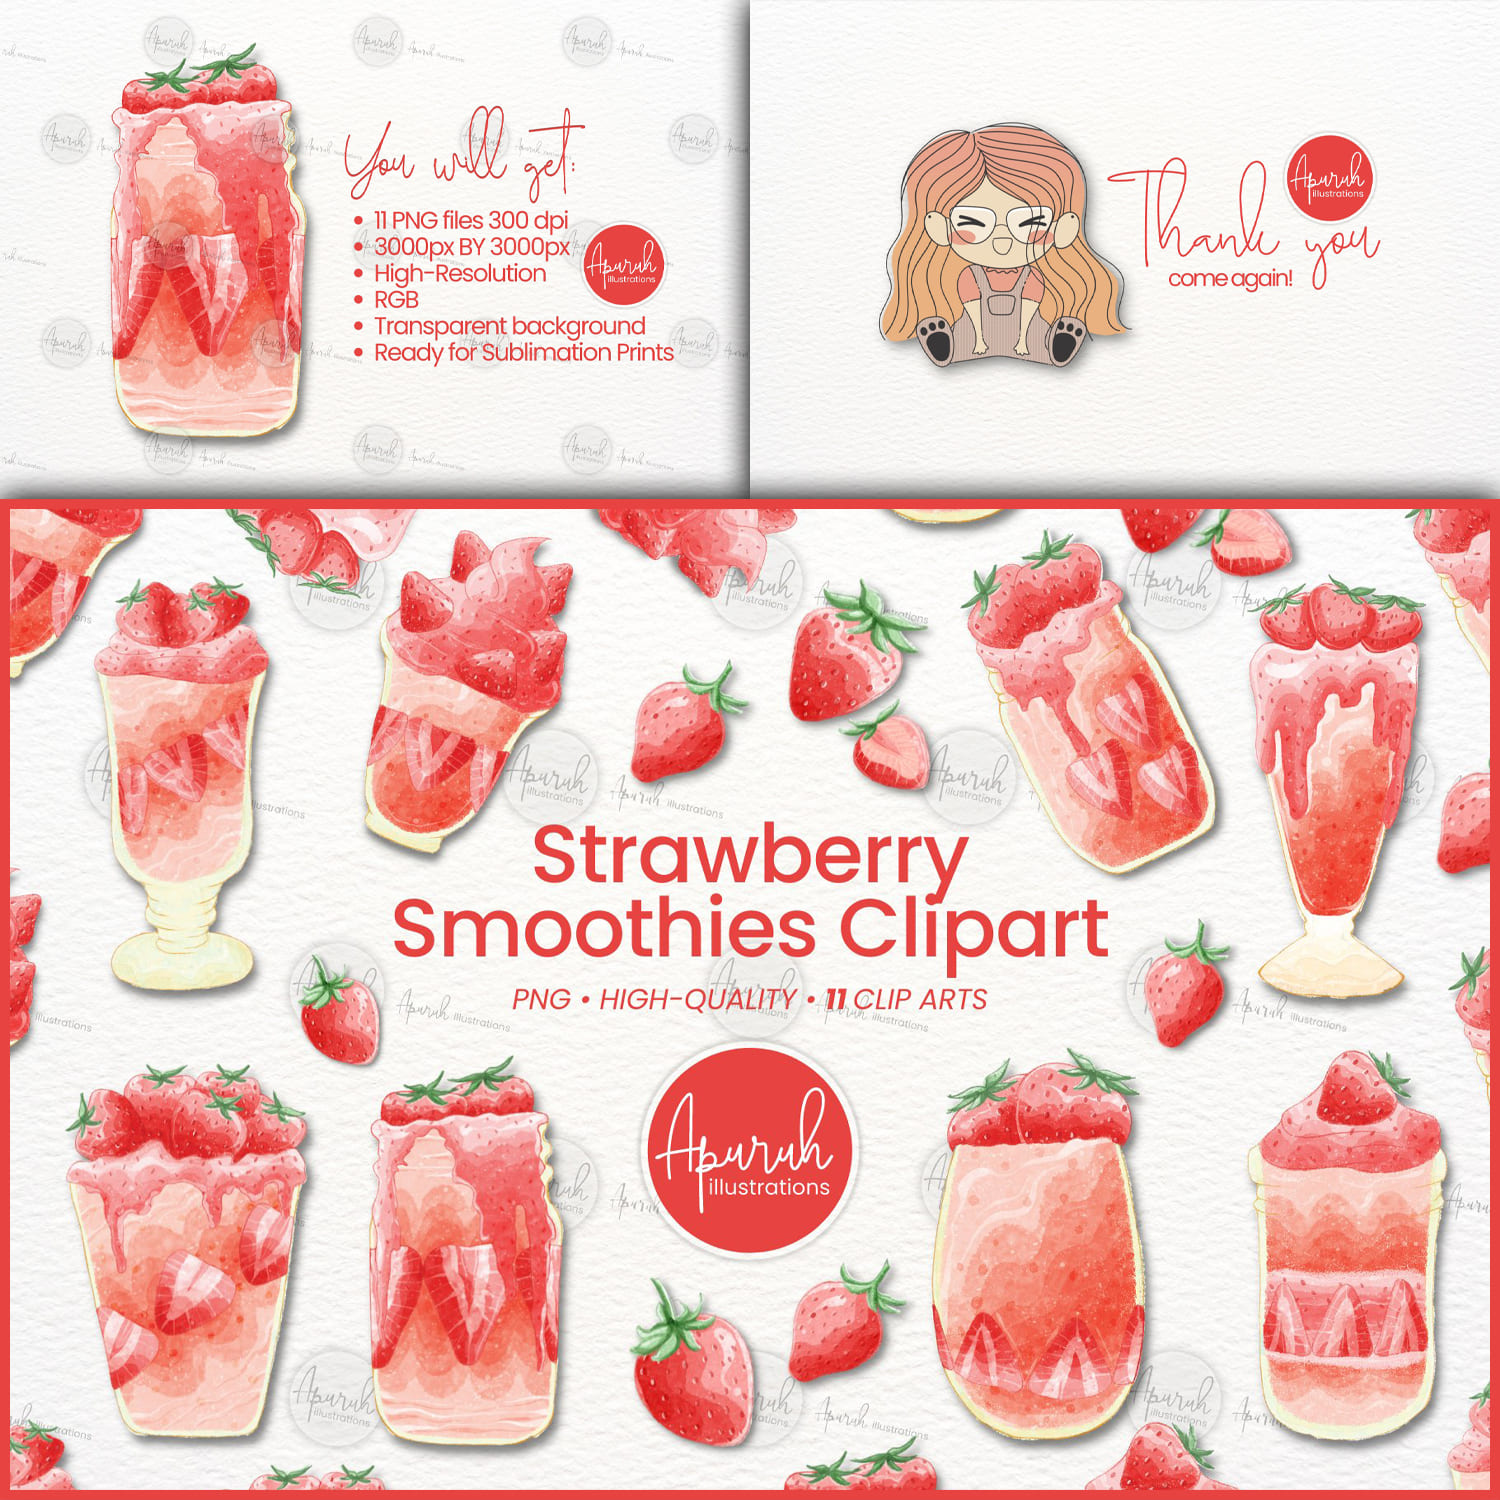 1963046 strawberry smoothies watercolor clipart 1500 1500 2 901